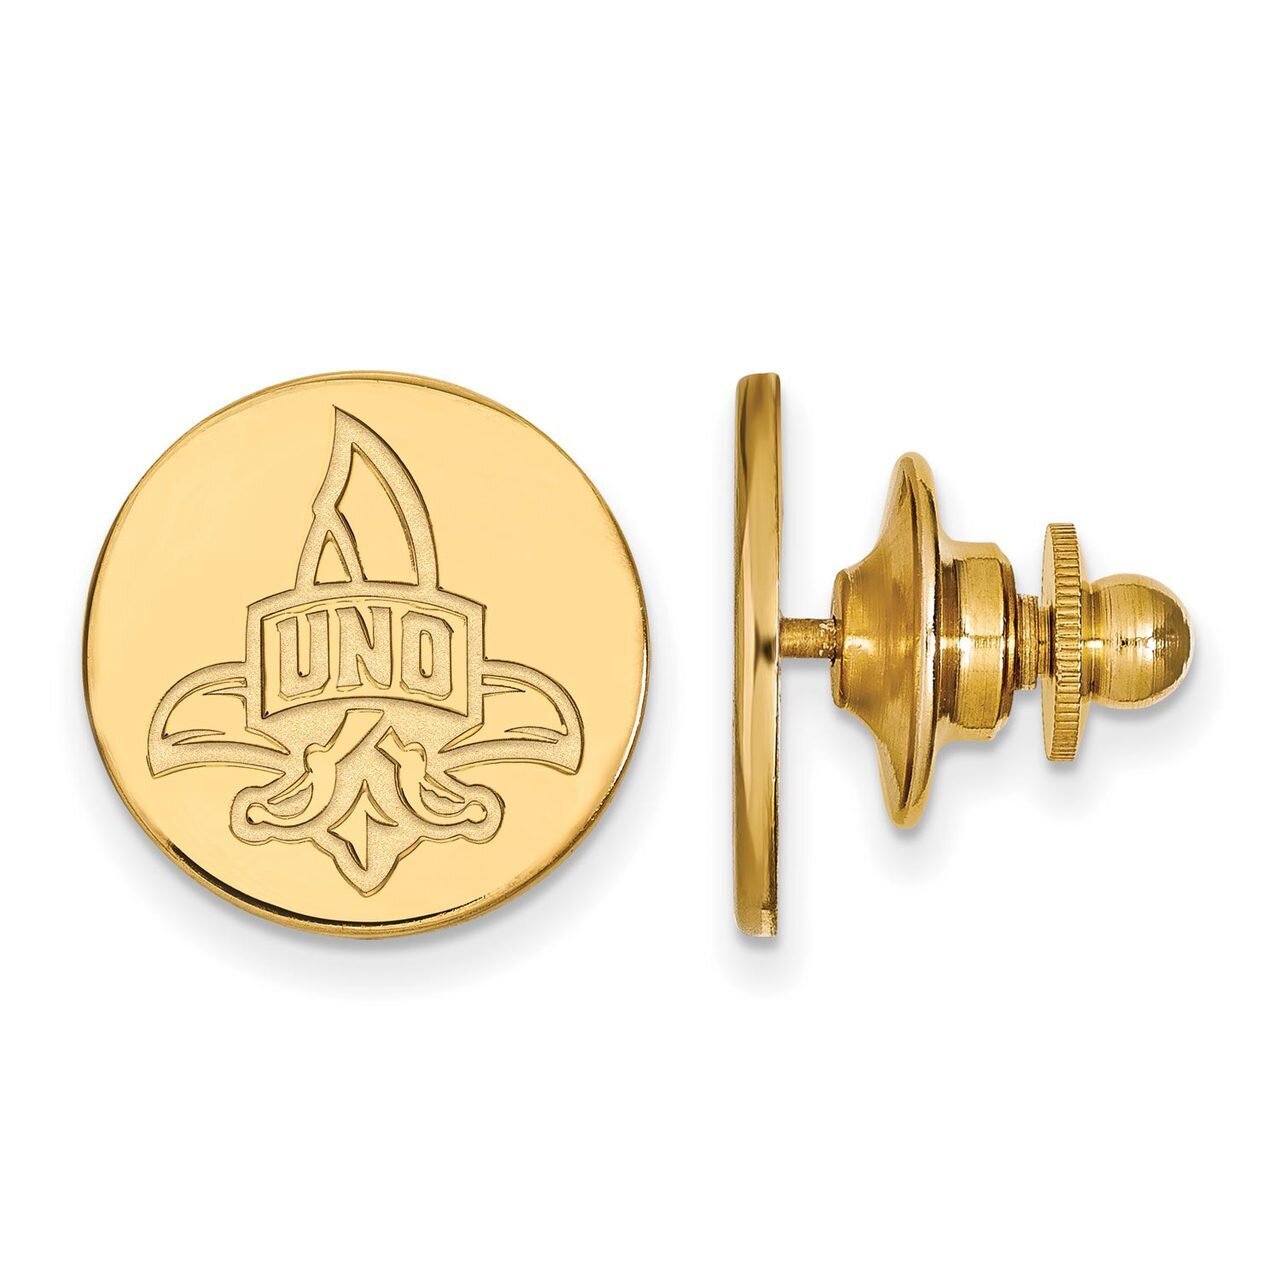 University of New Orleans Lapel Pin 14k Yellow Gold 4Y007UNO